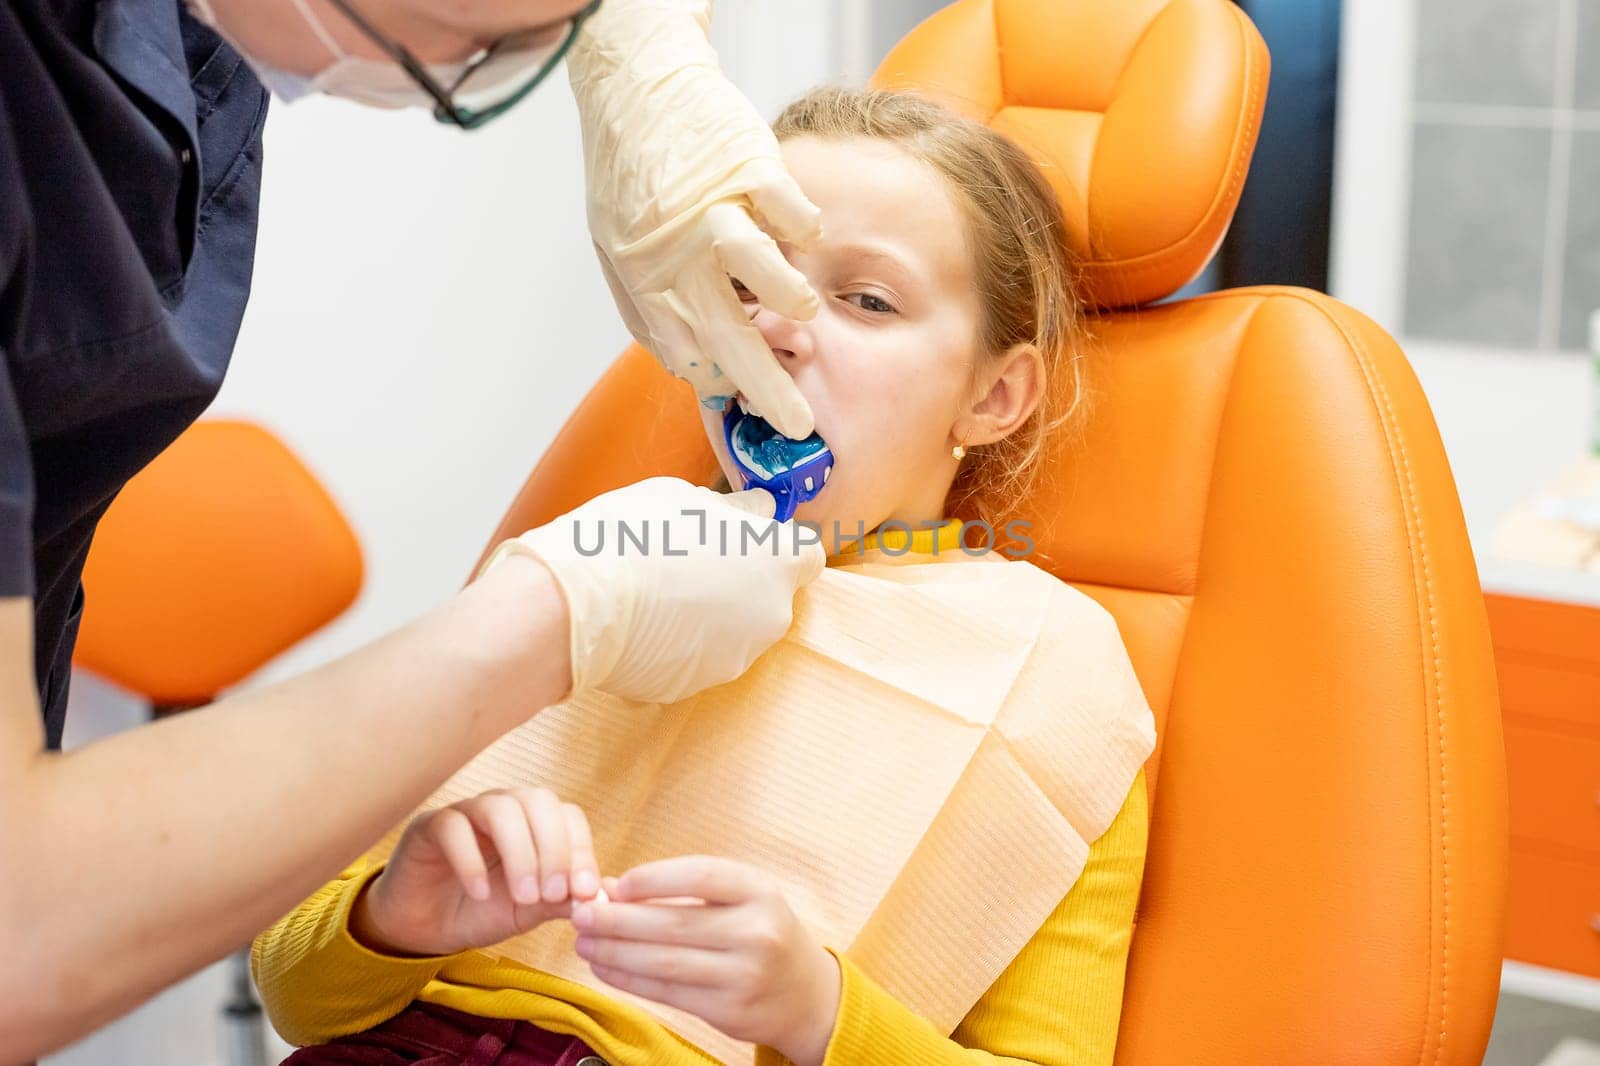 The orthodontist prepares a special paste for making an impression of the patient's teeth.